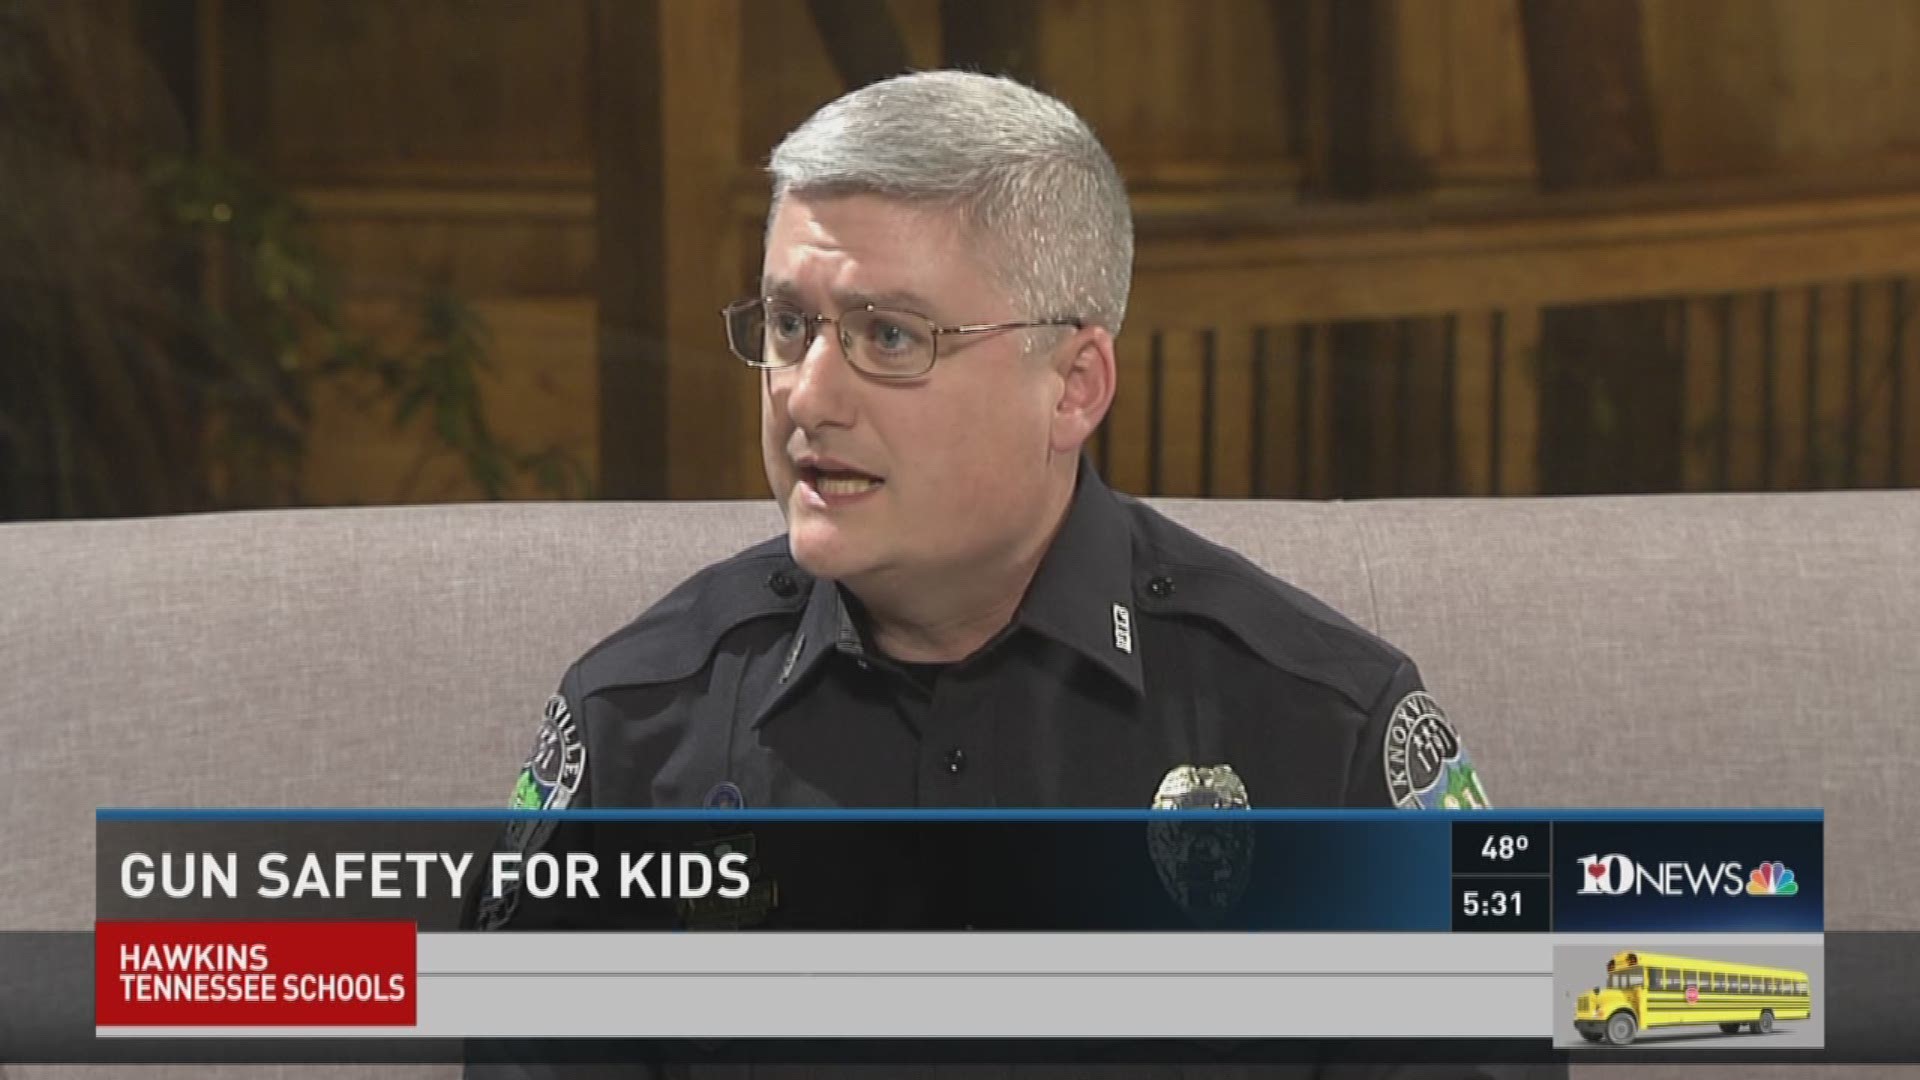 After a child was accidentally shot by a sibling, KPD officer Adam Wilson, a firearms instructor, talks about how to keep your firearms secured and kids safe.